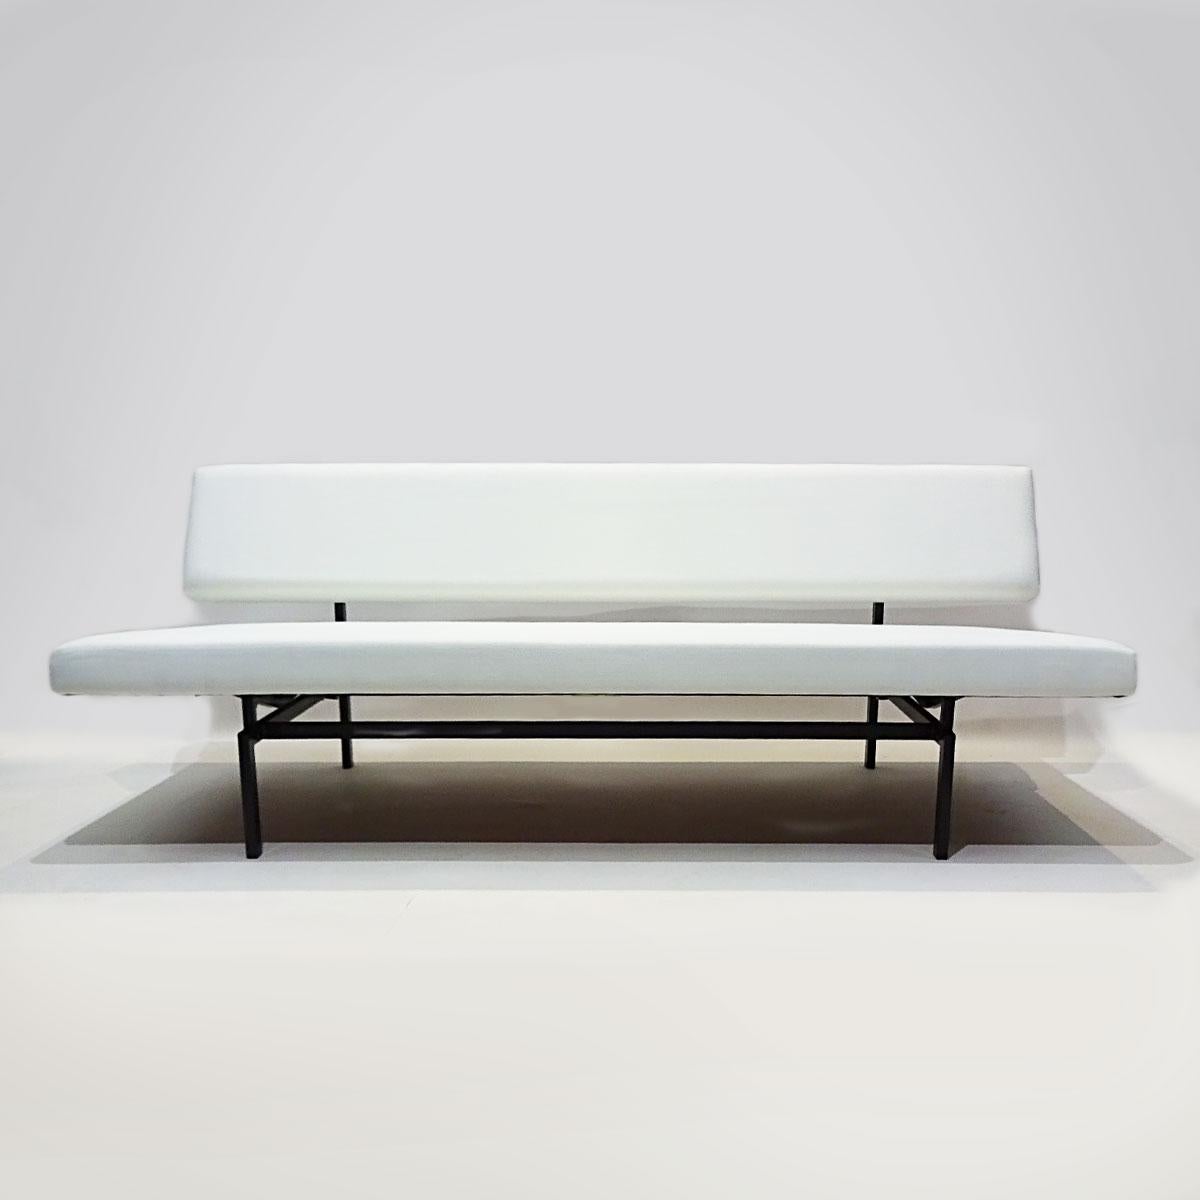 A Classic Minimalist daybed designed by Gijs Van Der Sluis in the 1950s and manufactured in the Netherlands by Gispen. This sofa’s sleek, minimalists lines has been a favourite of Interior Designers and discerning buyers for over 60 years and still